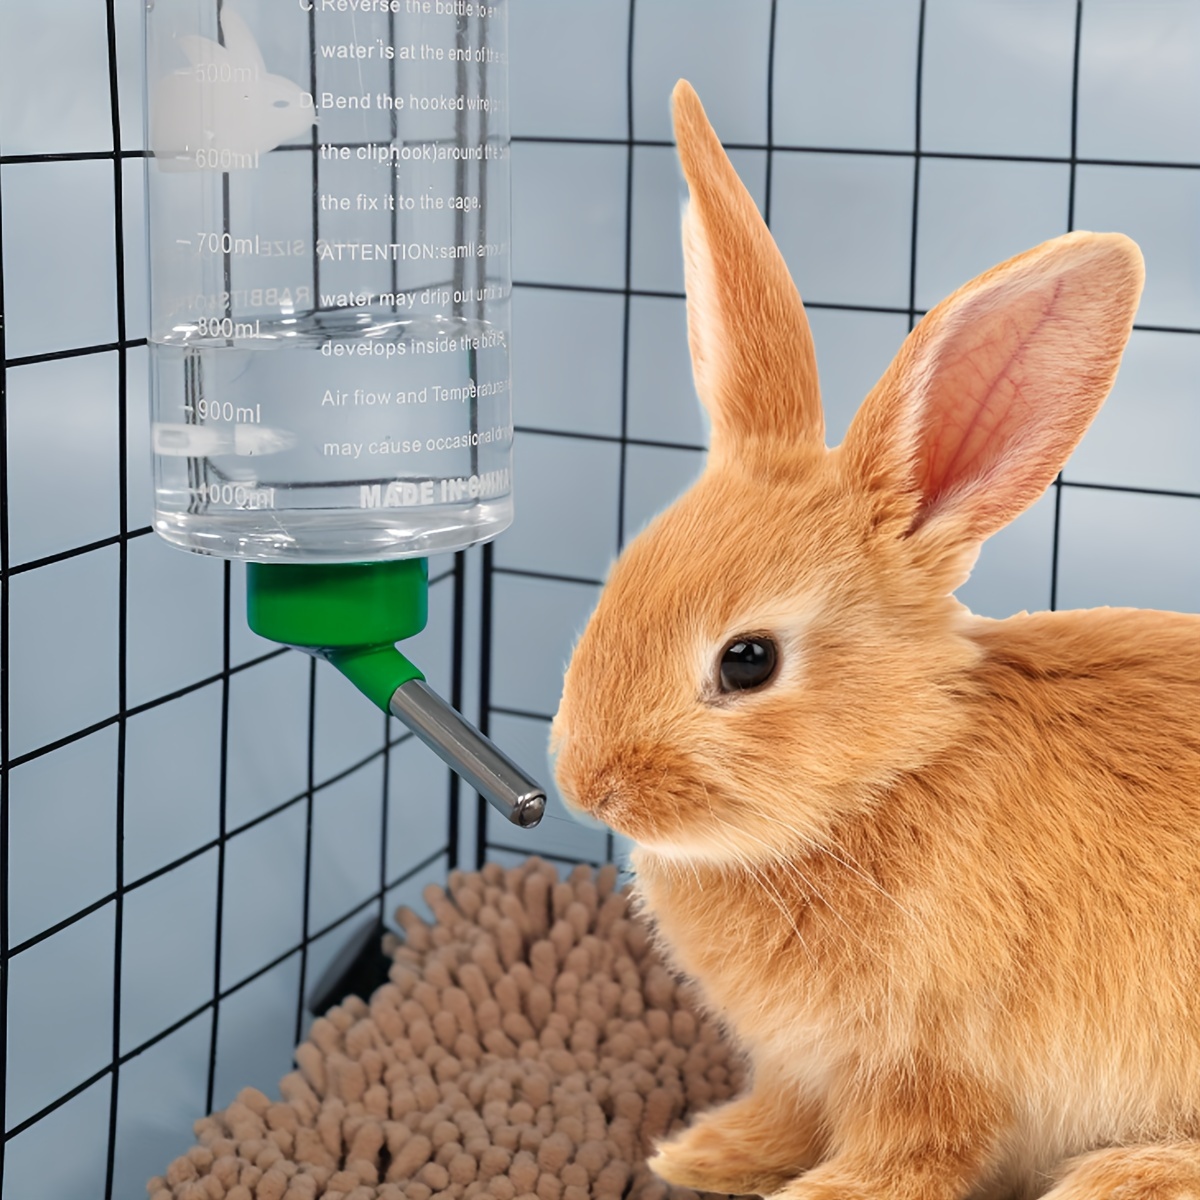 

1000ml Convenient Hanging Water Bottle For Small Animals - Perfect For Rabbits And Guinea Pigs